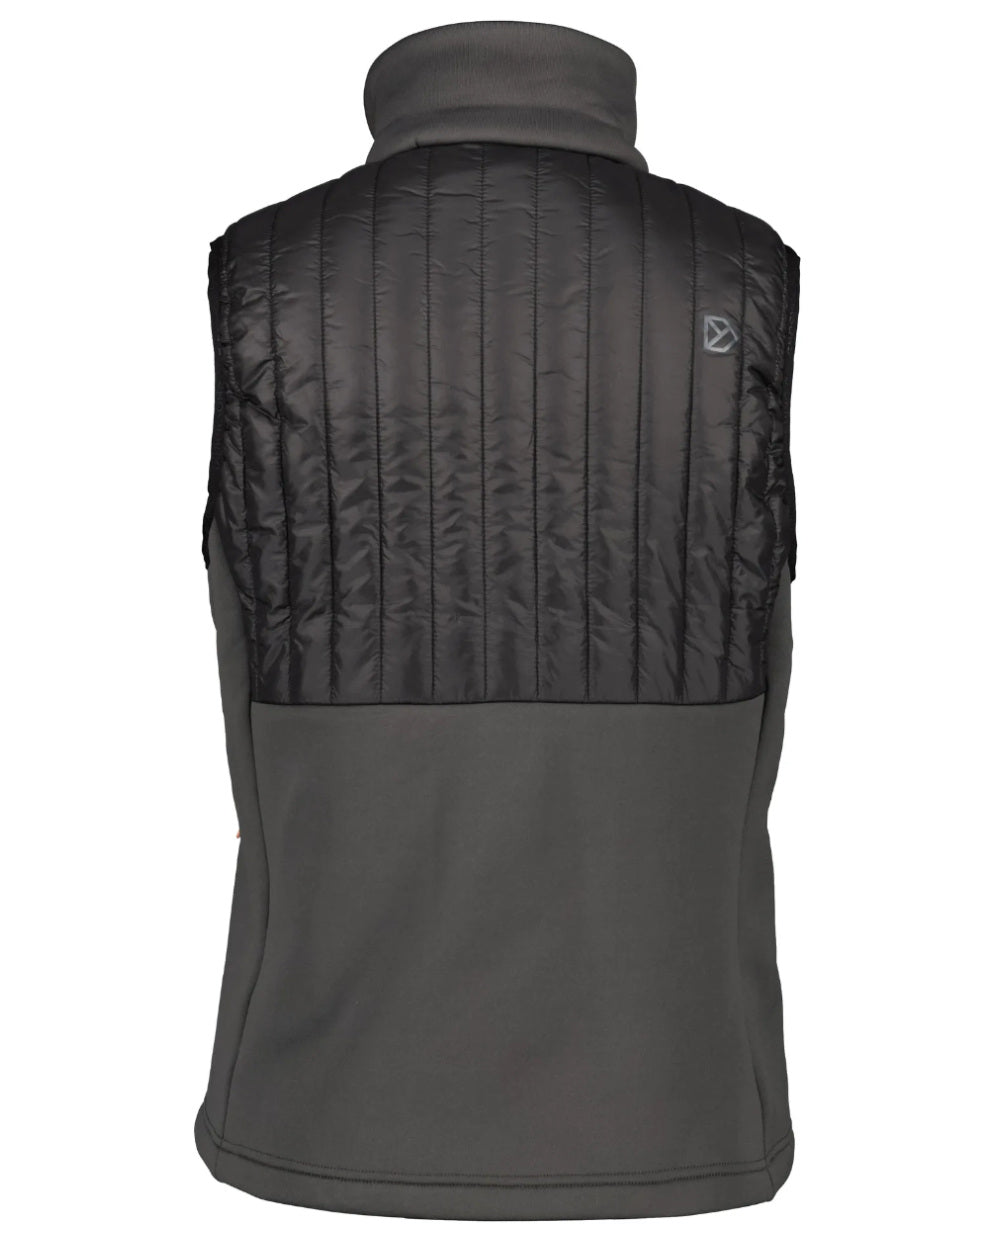 Coal Black Coloured Didriksons Annema Womens Vest On A White Background 